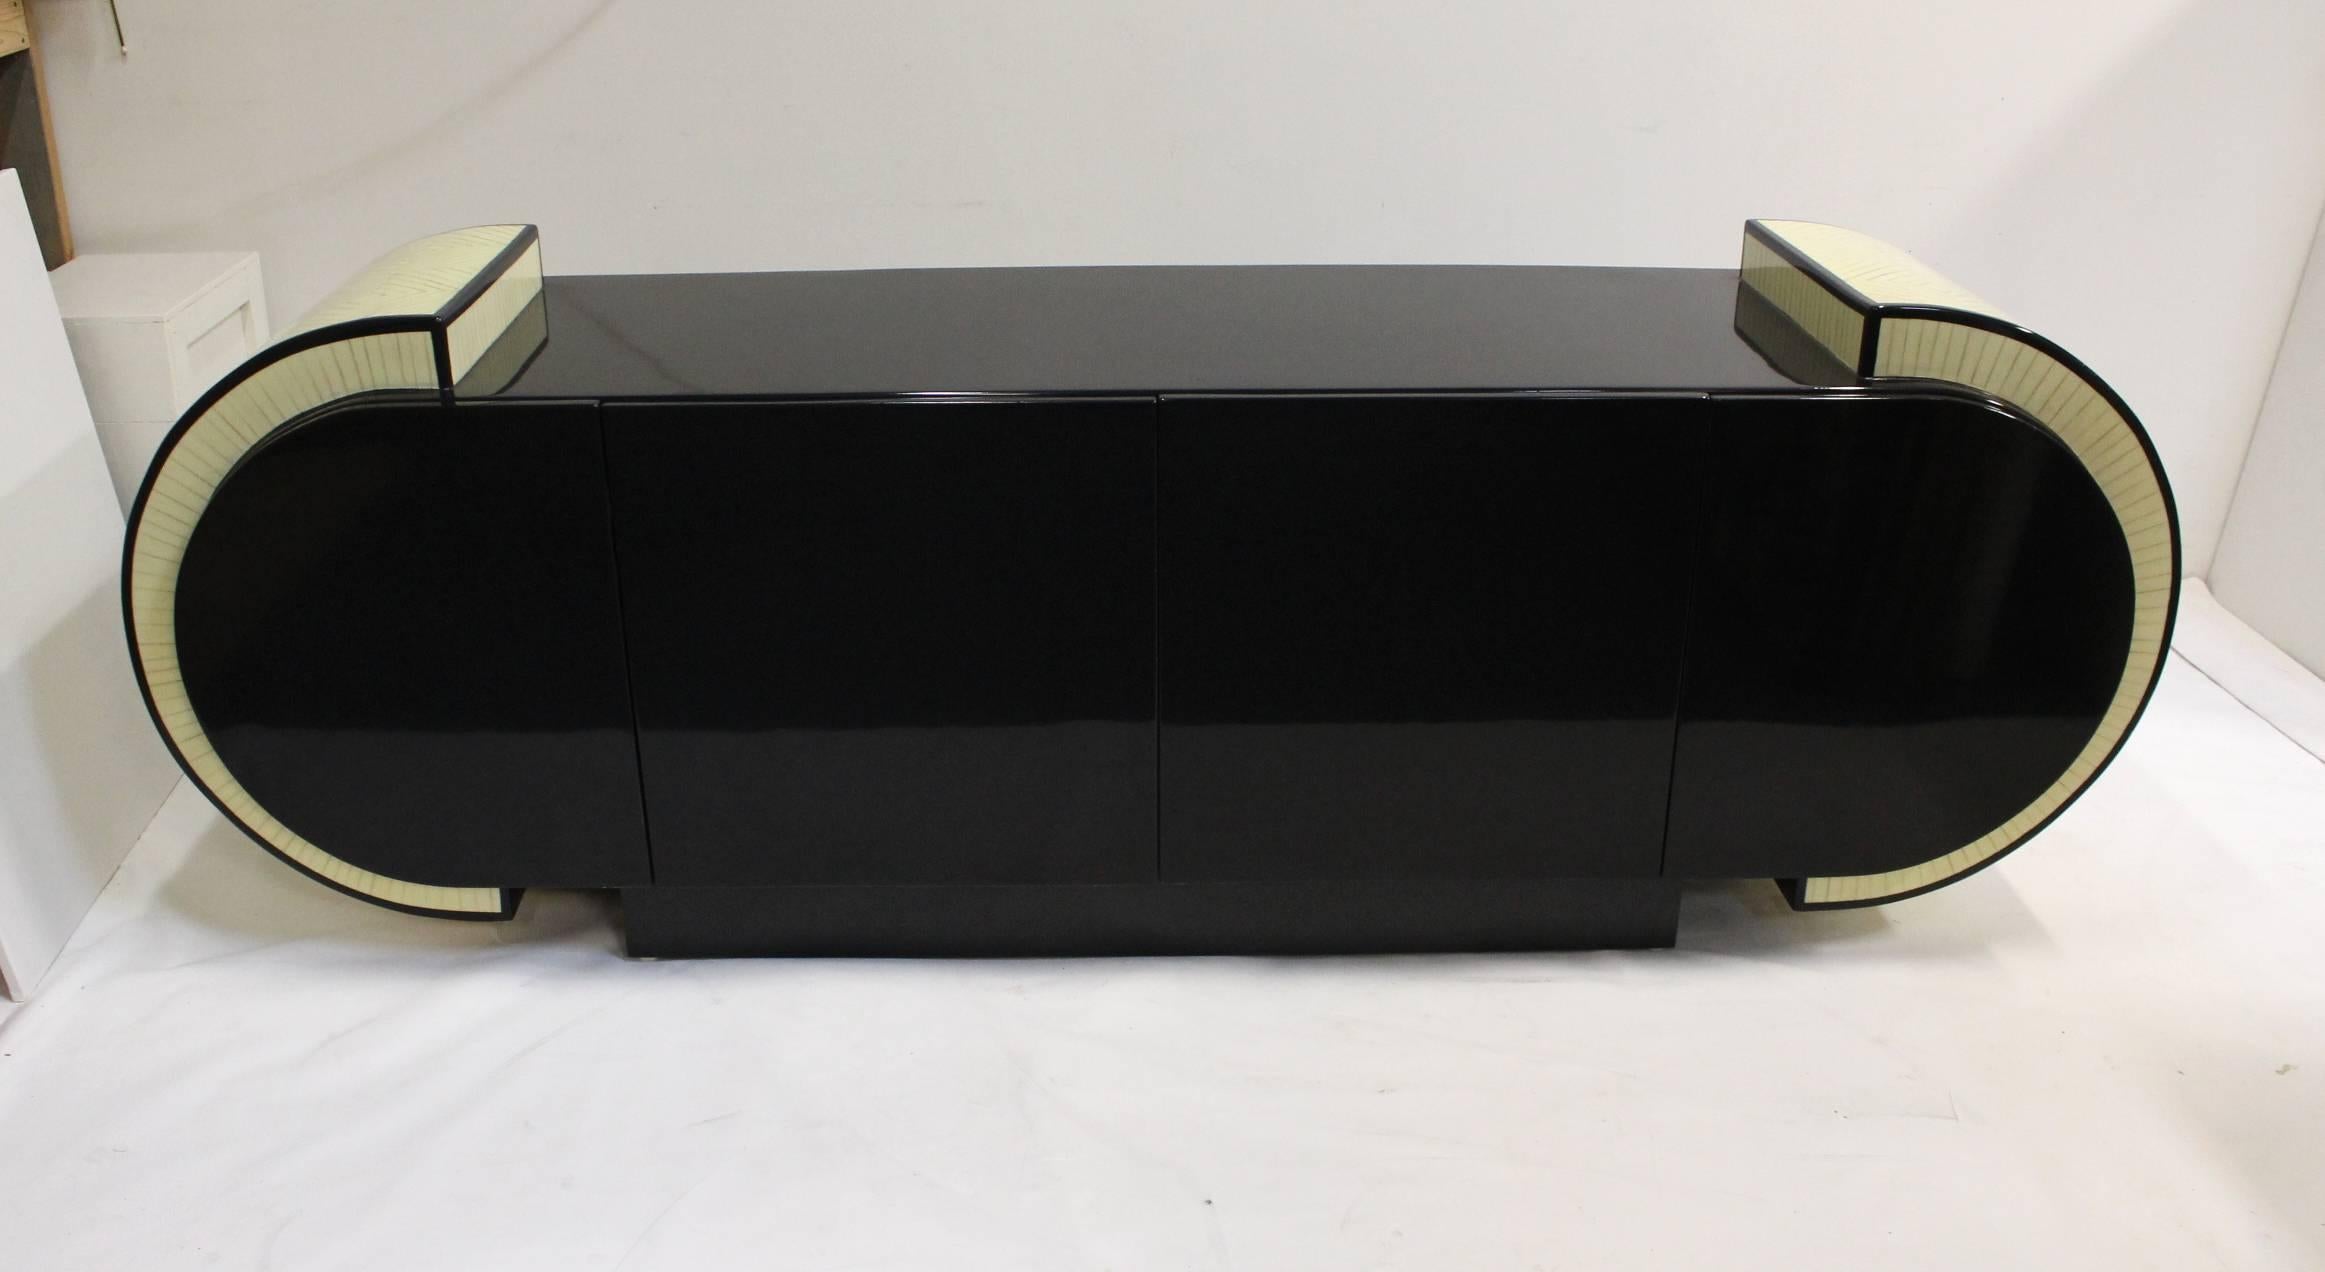 Massive (8 foot wide) black lacquered Pierre Cardin style dresser/buffet with four doors and two drawers inside. Shiny black body with faux inlaid bone sides. Amazing, one of a kind decorative piece.